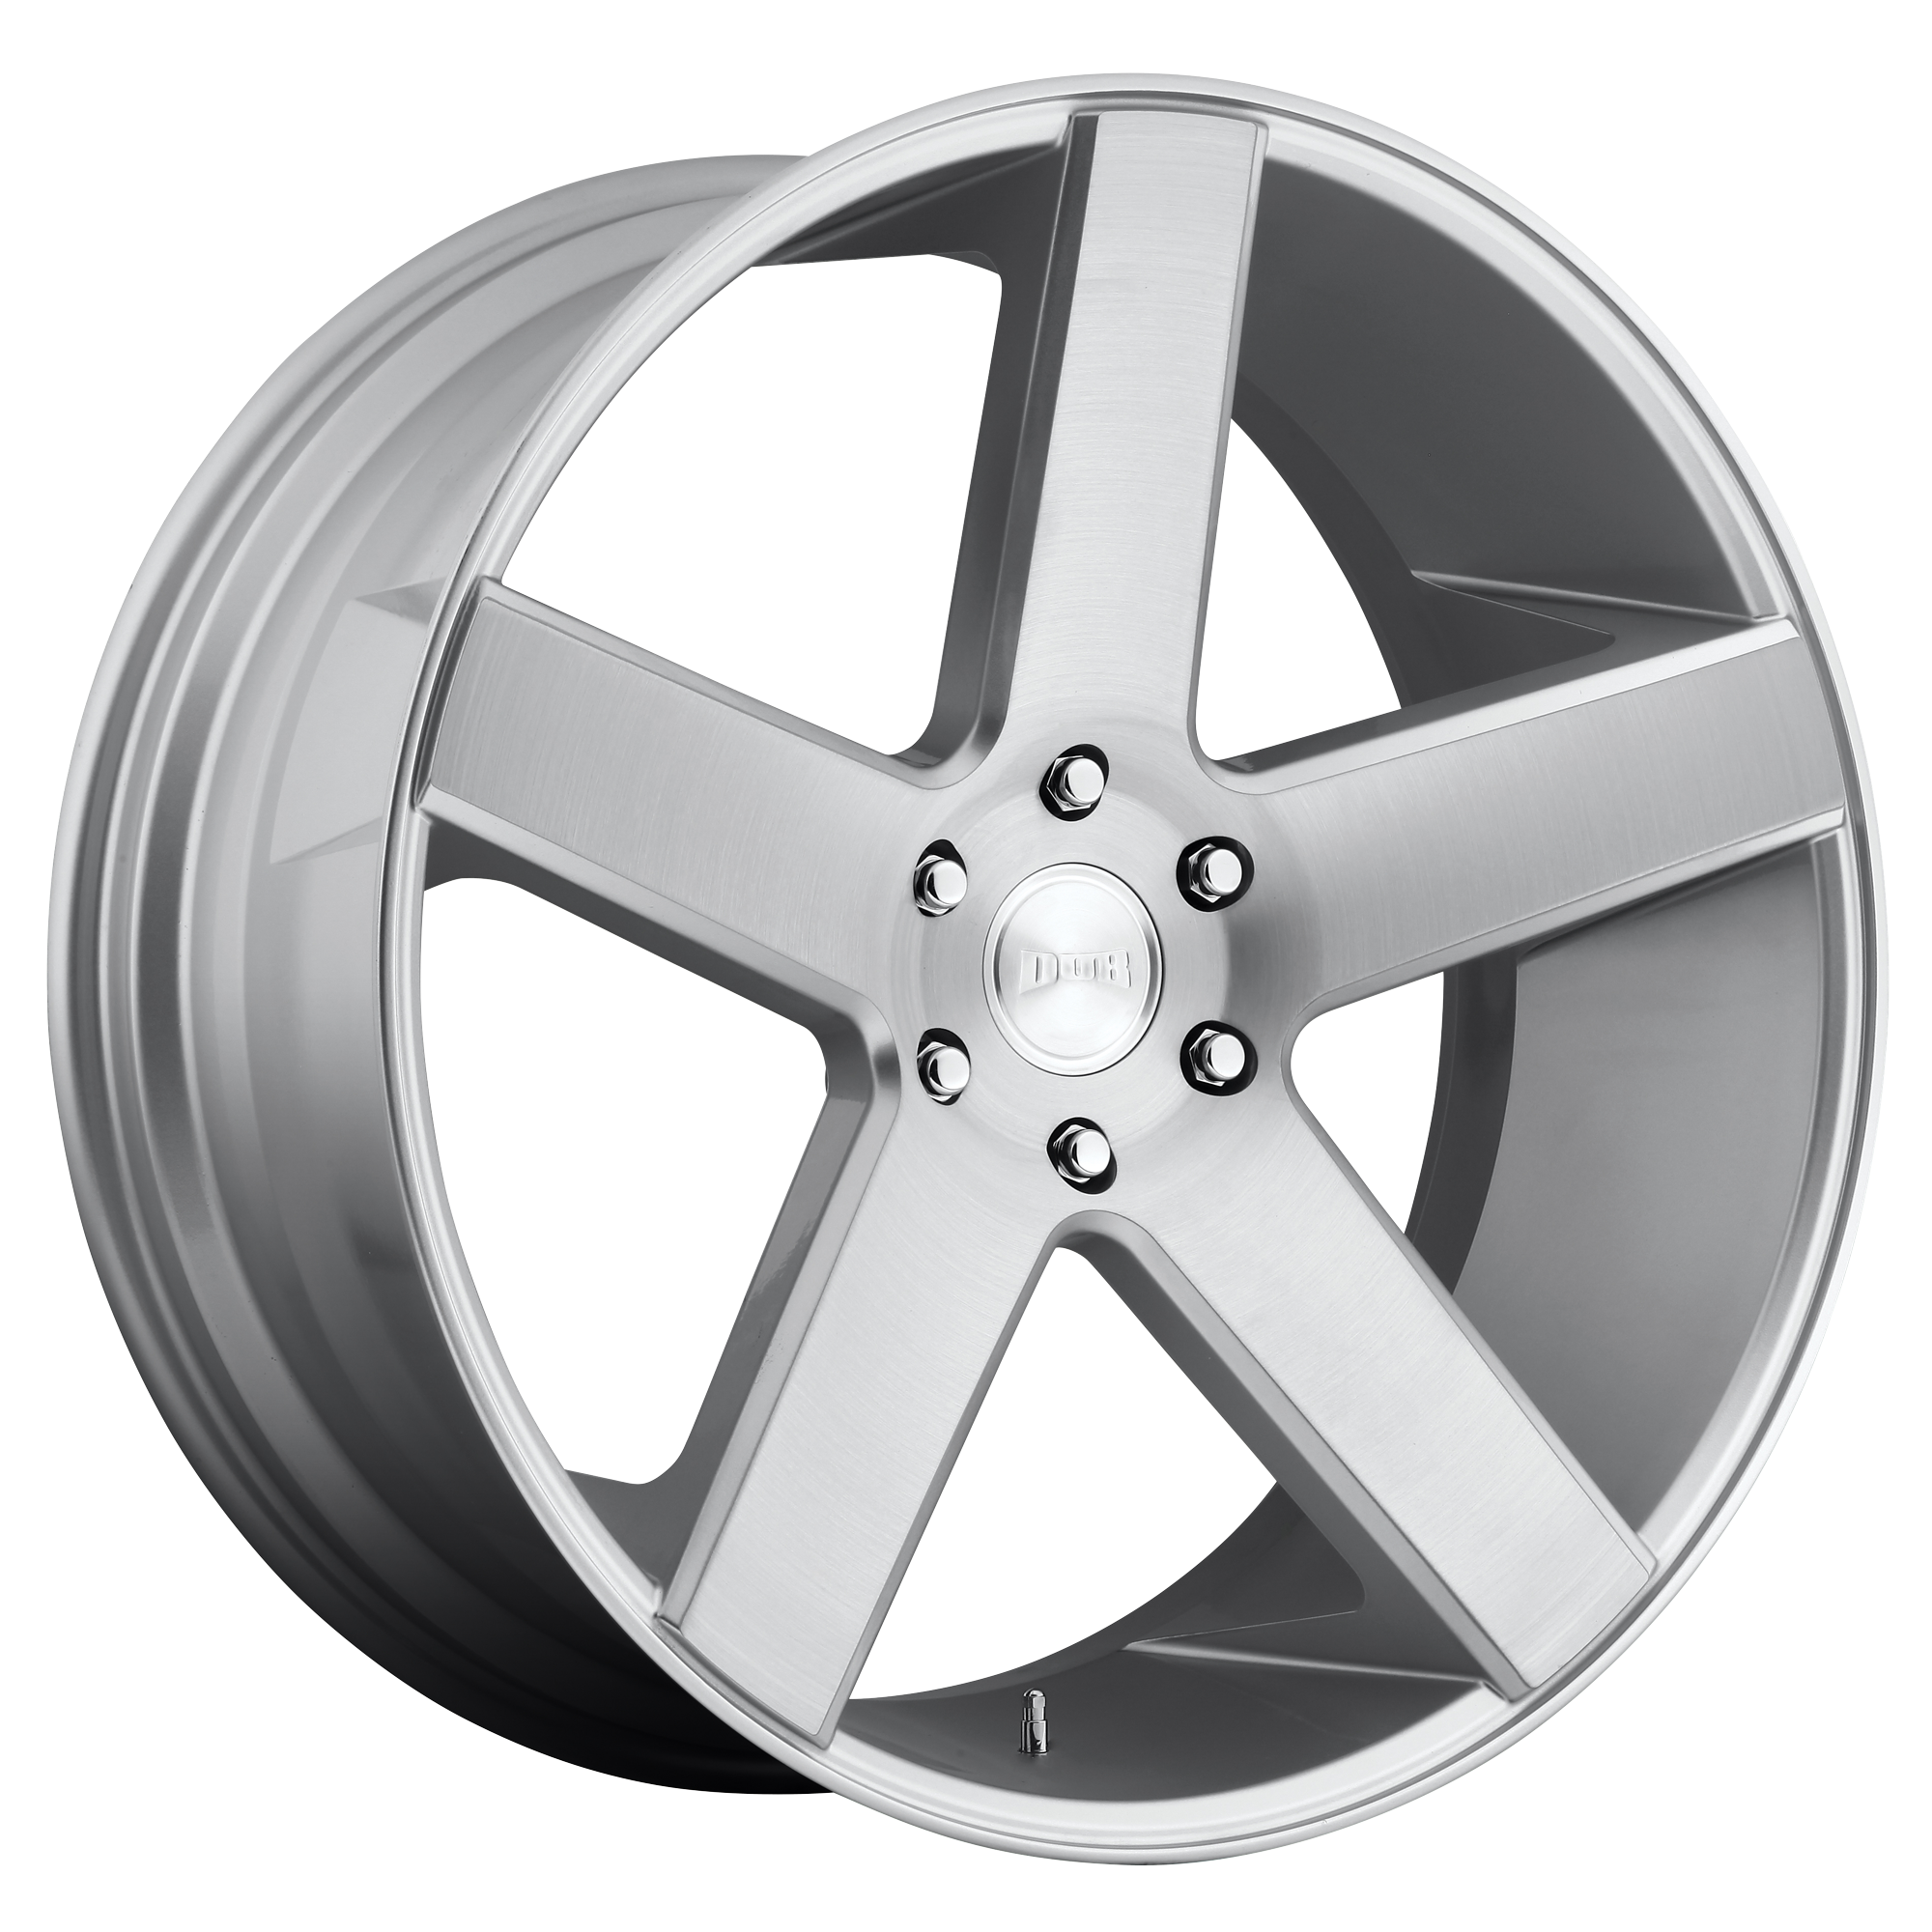 BALLER 22x9.5 5x139.70 GLOSS SILVER BRUSHED (26 mm) - Tires and Engine Performance